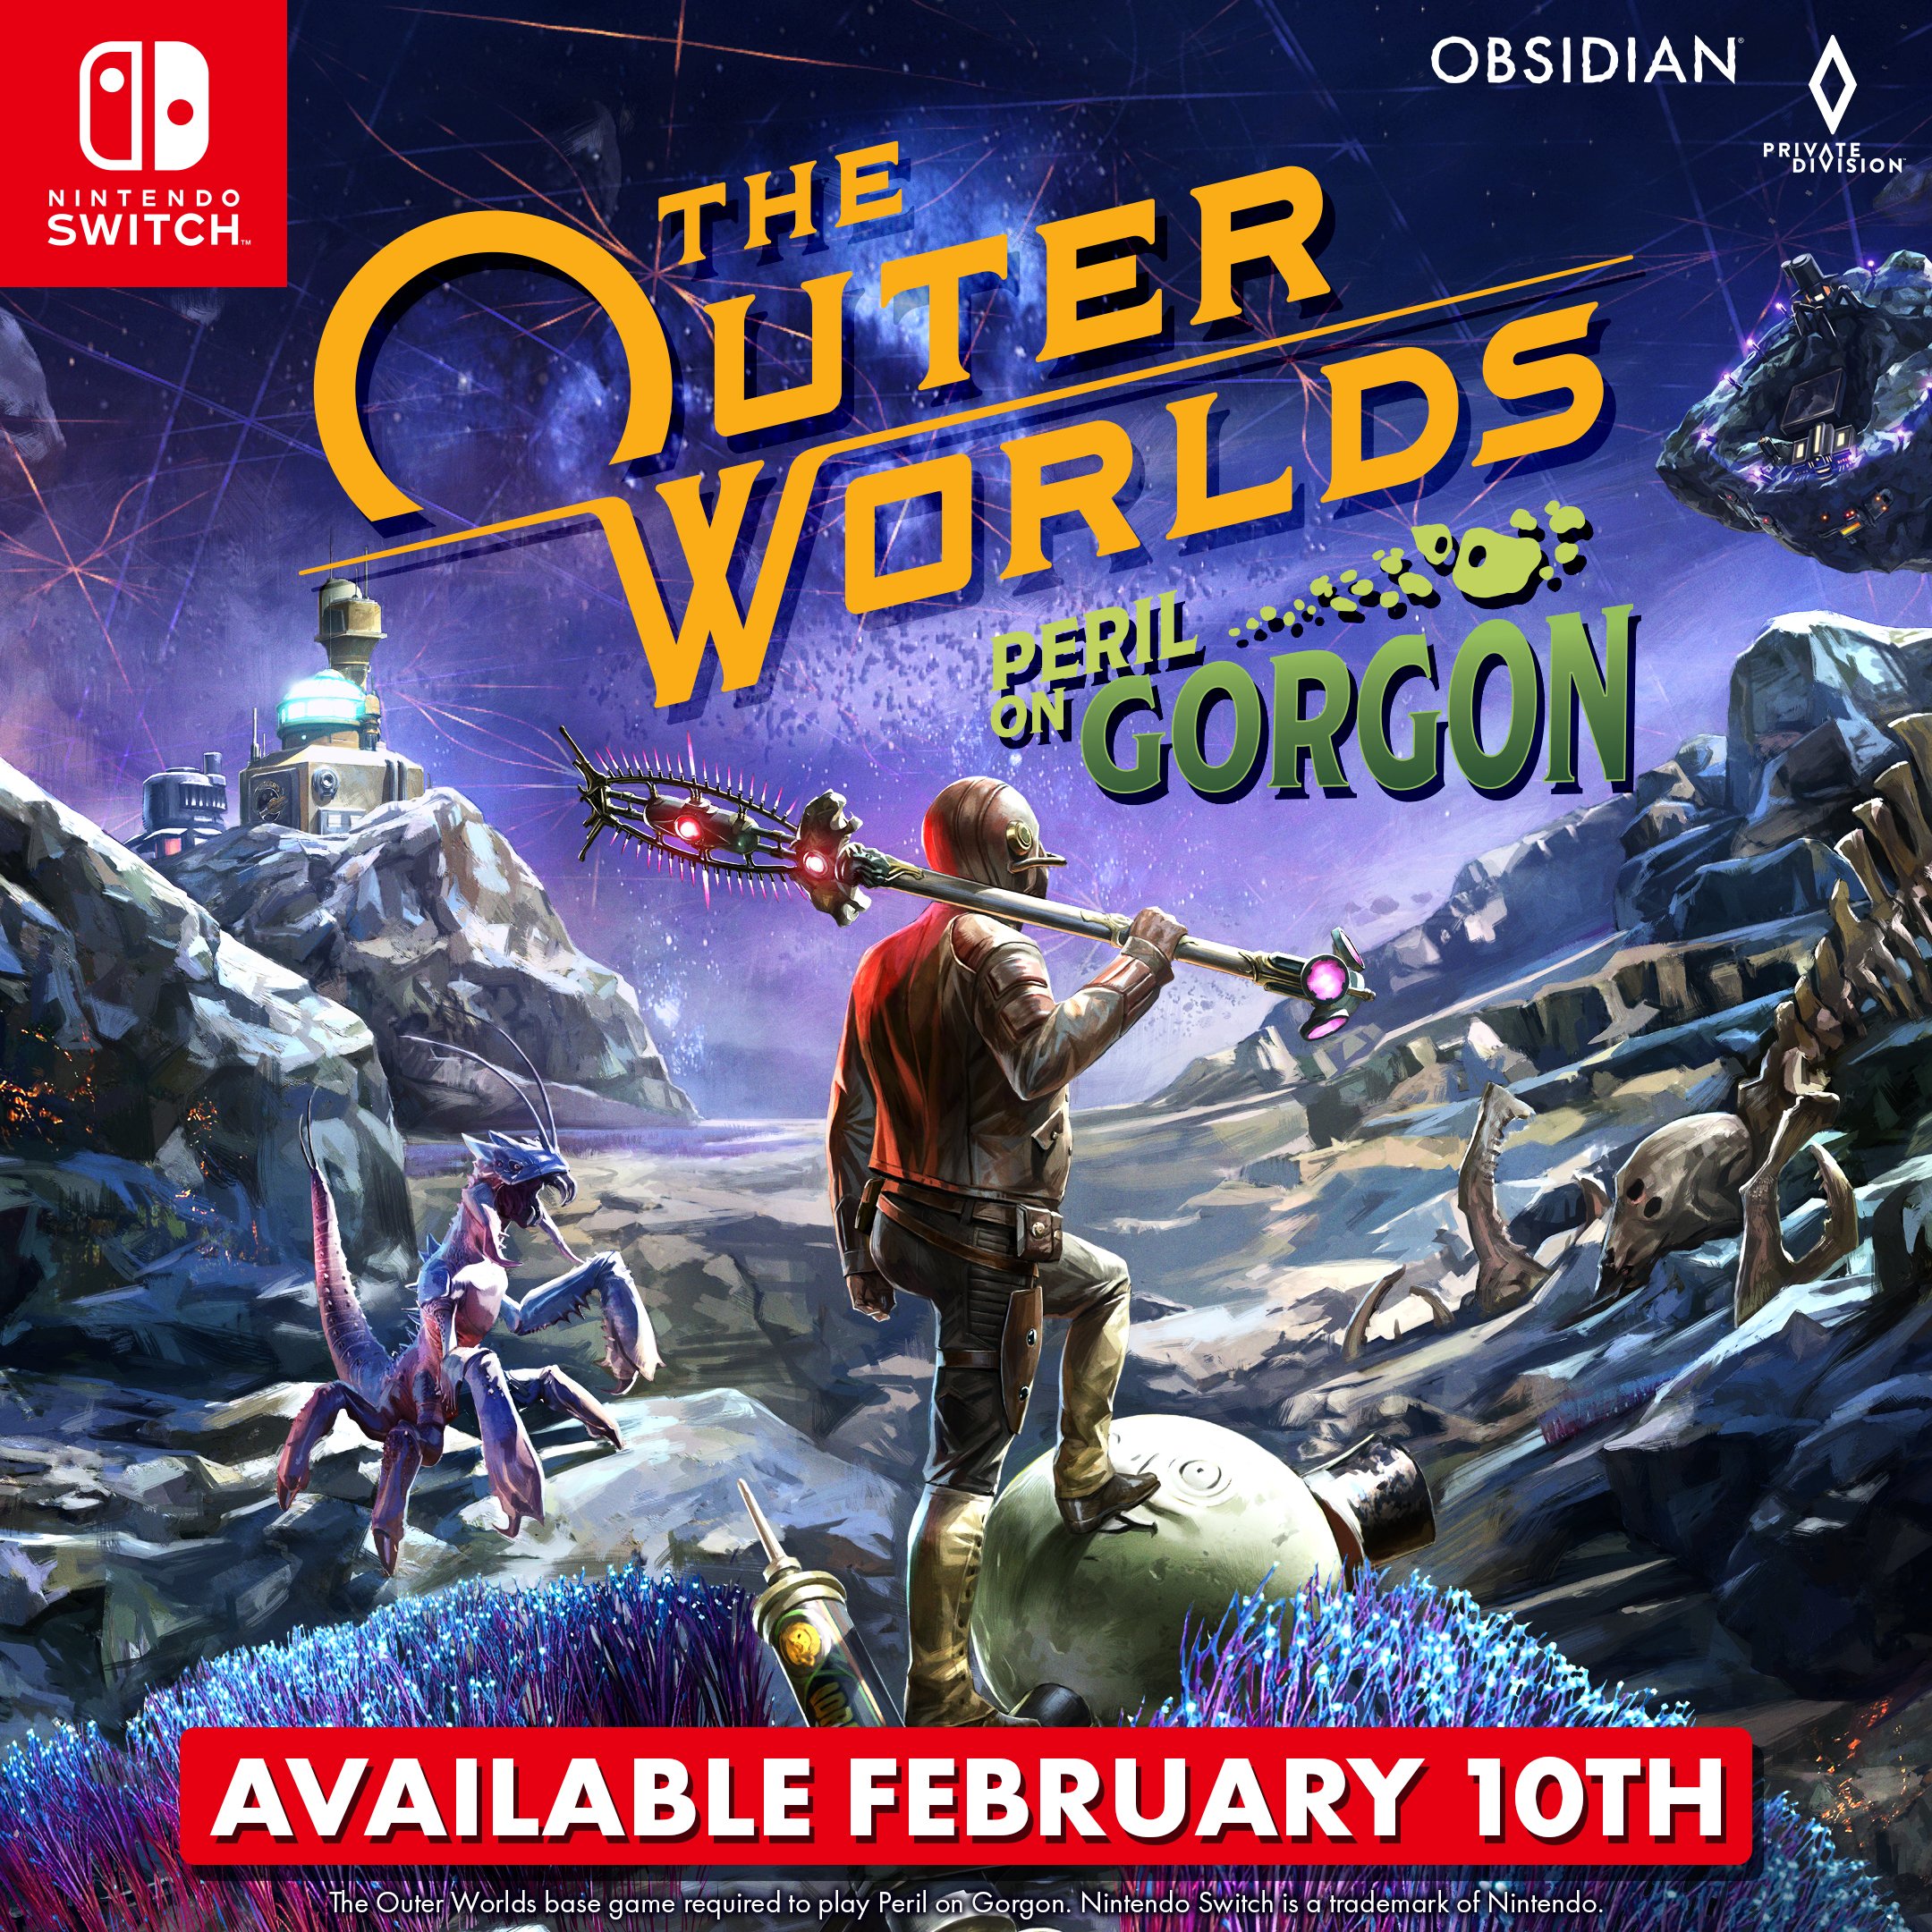 The Outer Worlds - Nintendo Switch, Nintendo Switch